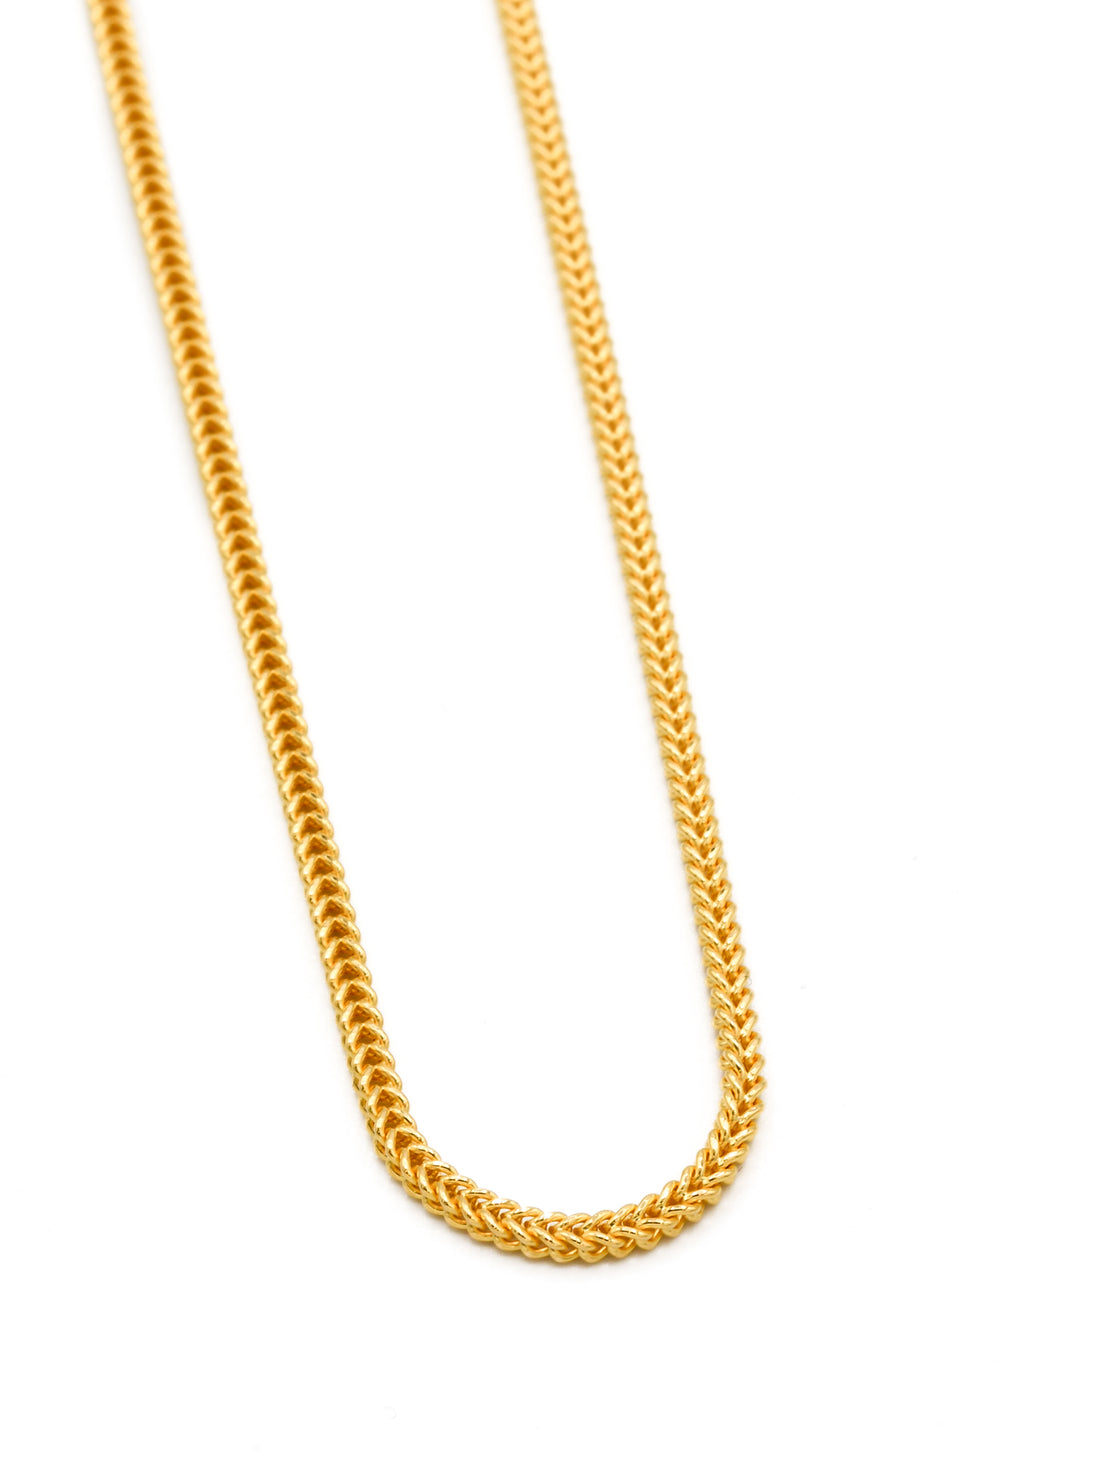 22ct Gold Hollow Fox Tail Chain - 55 CM - Roop Darshan